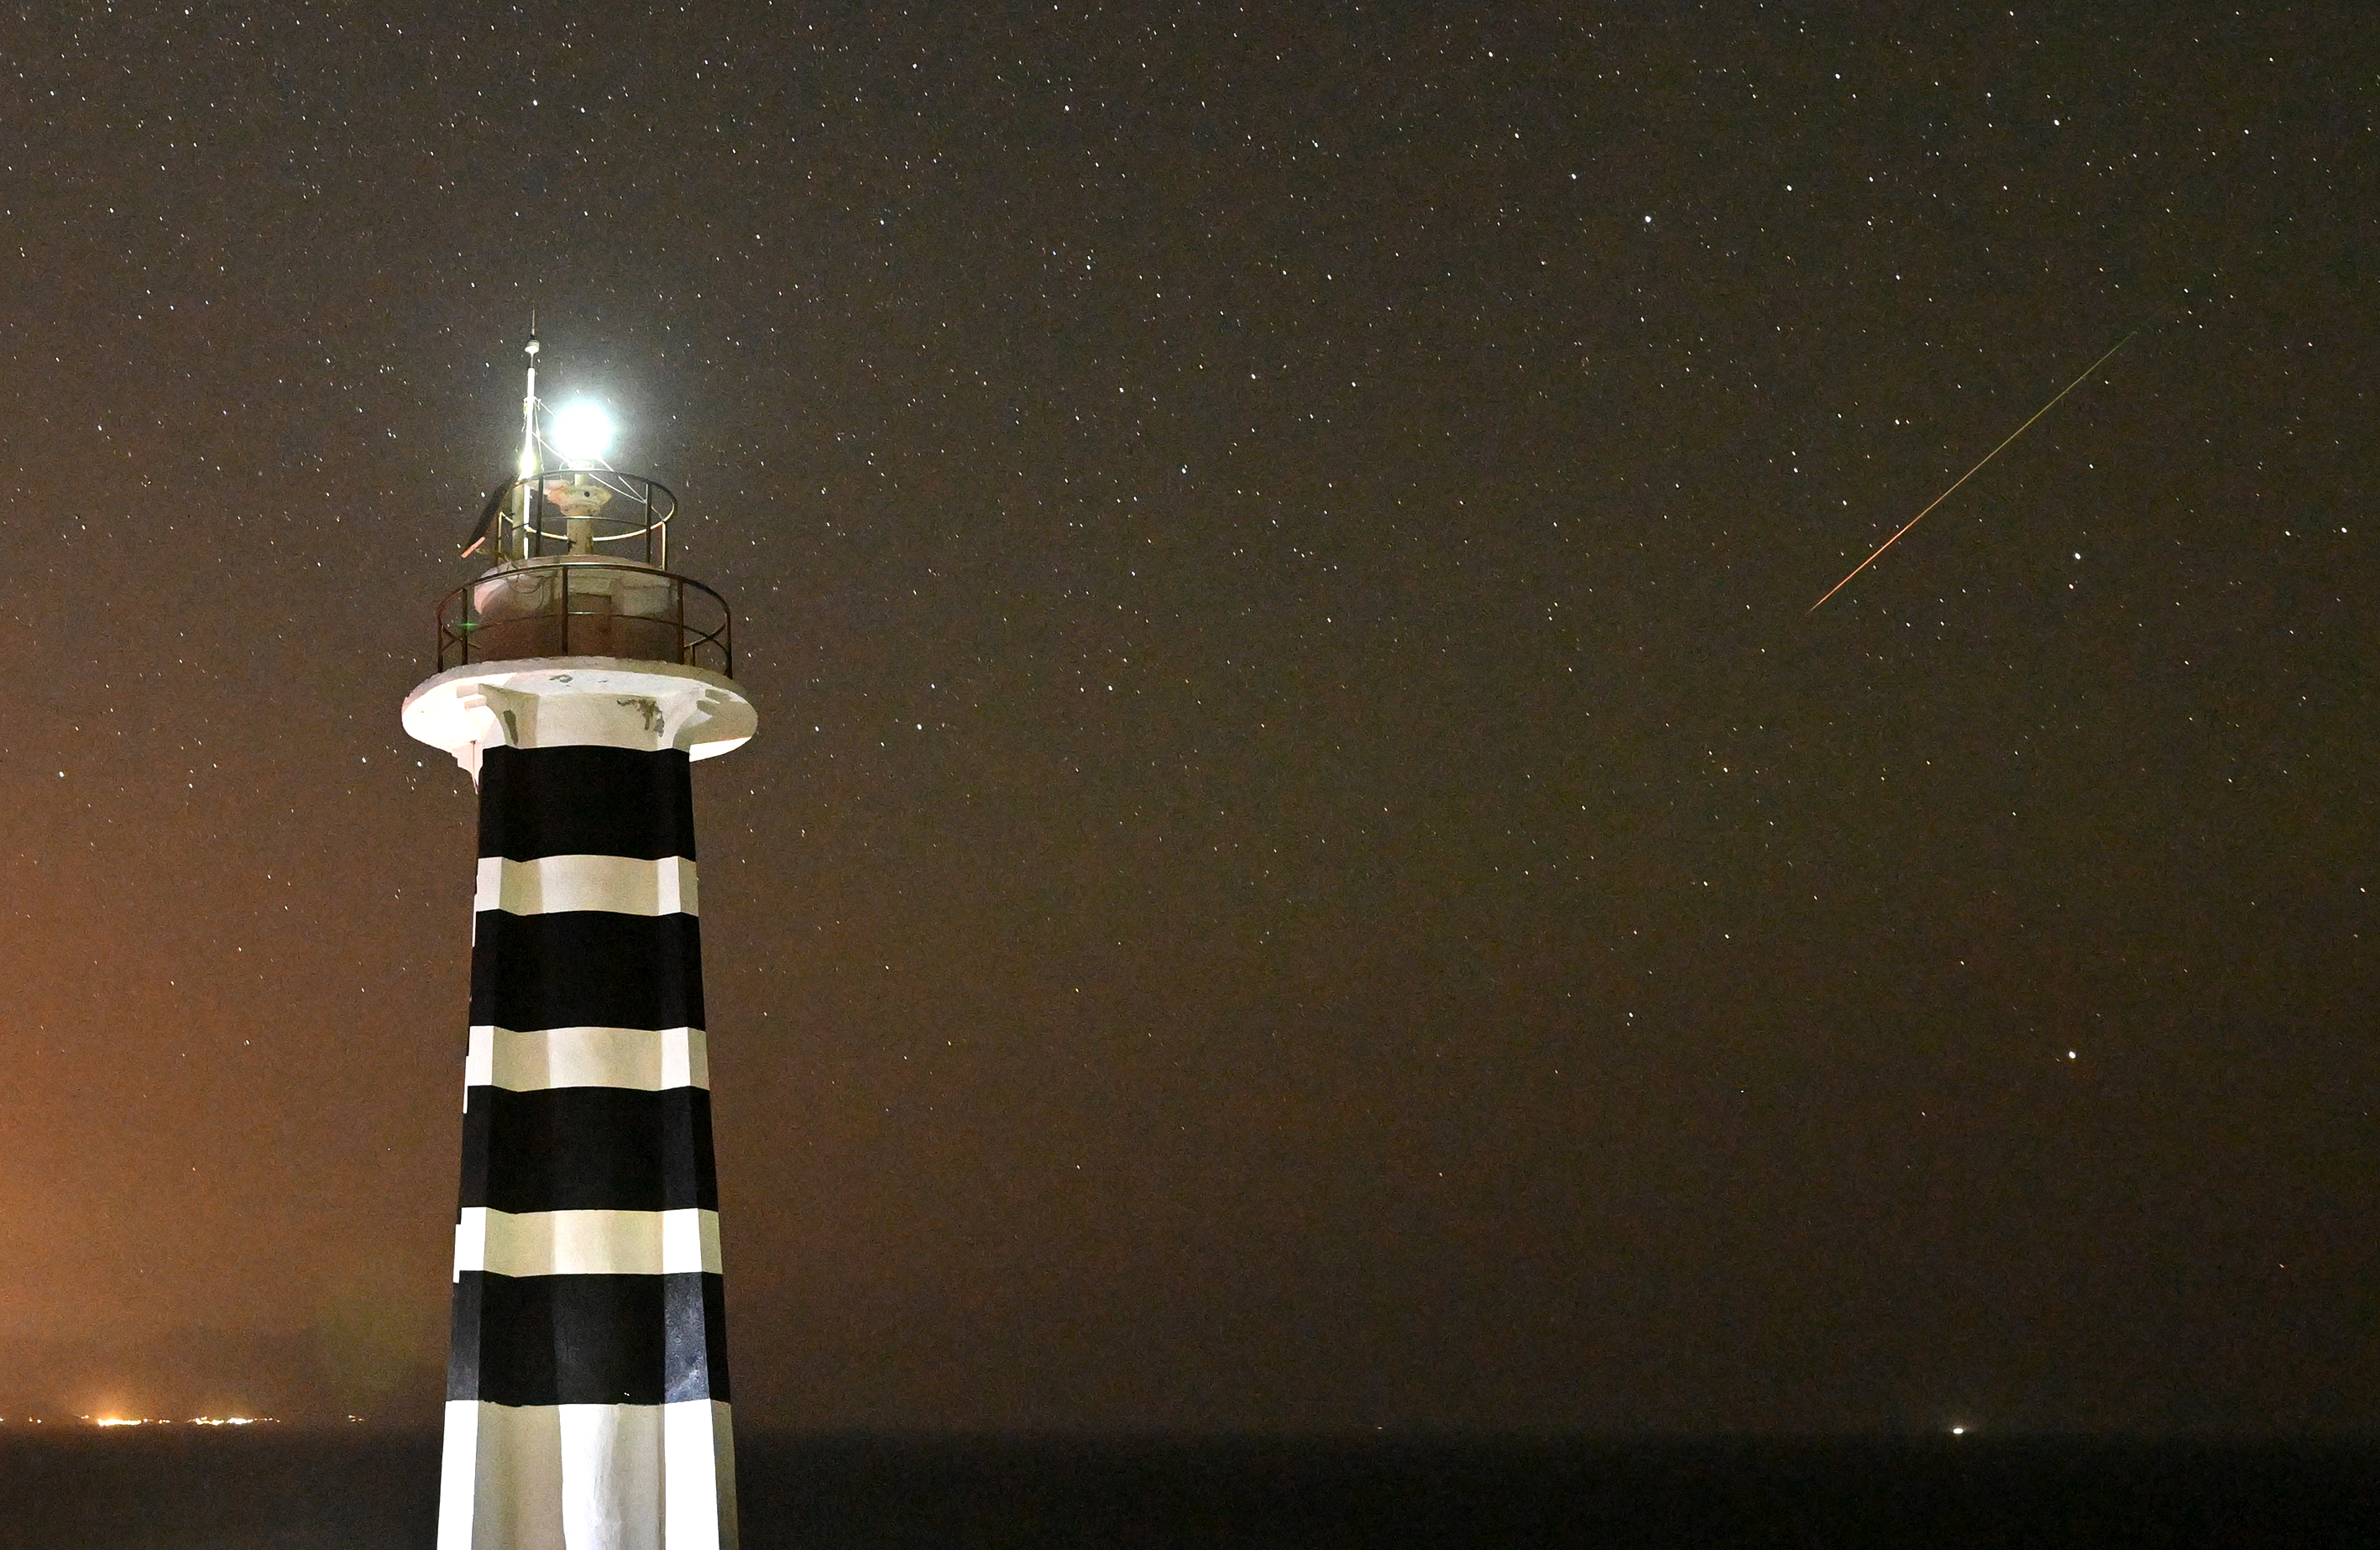 Perseid meteor on the right and a bright black and white striped beacon on the left.